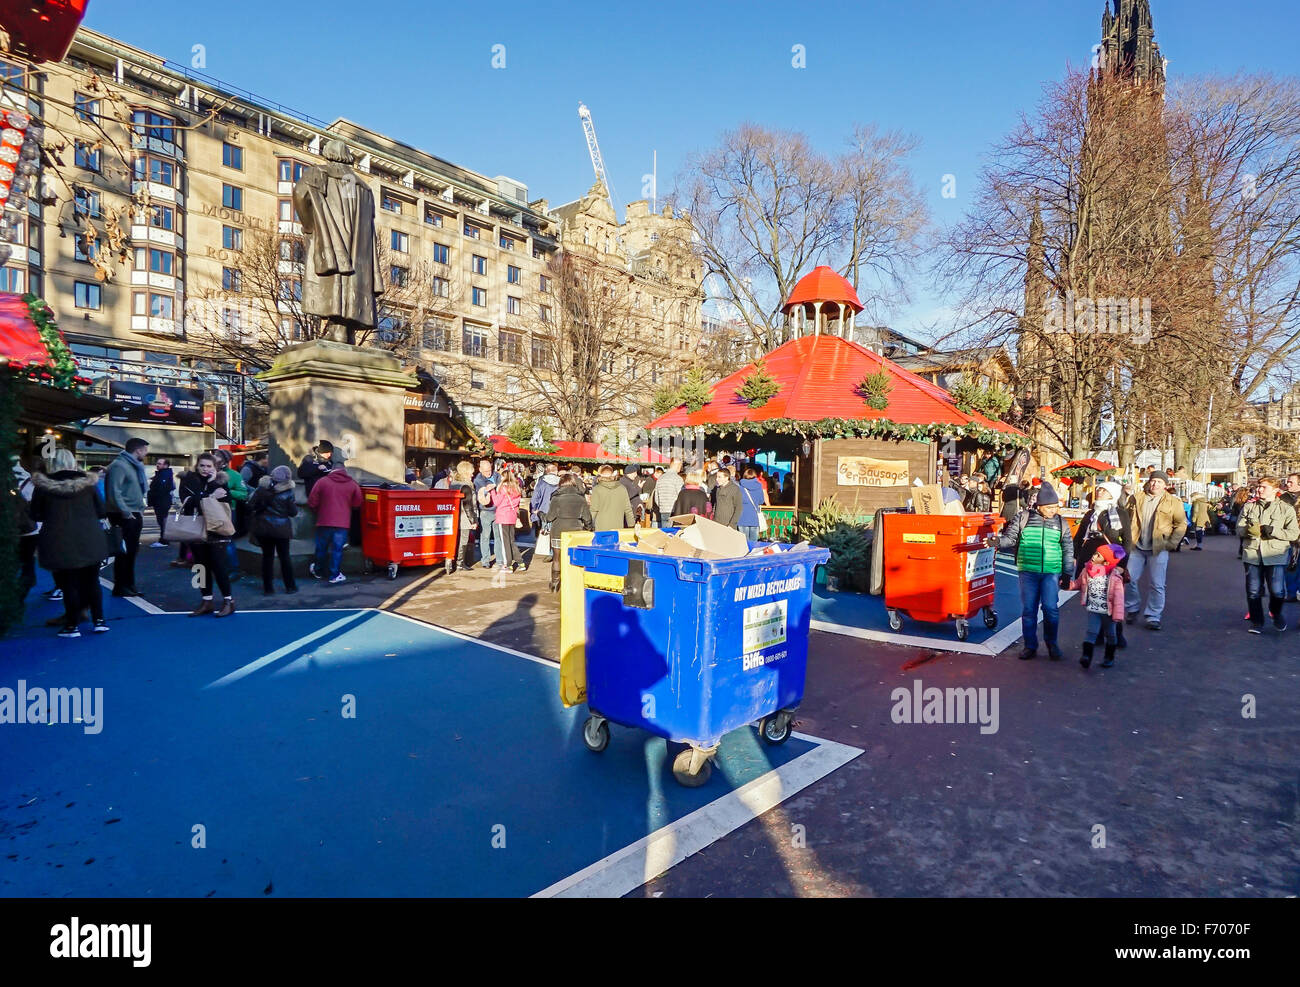 Edinburgh Christmas market 2015 showing stalls and waste bins prominently displayed and used. Stock Photo